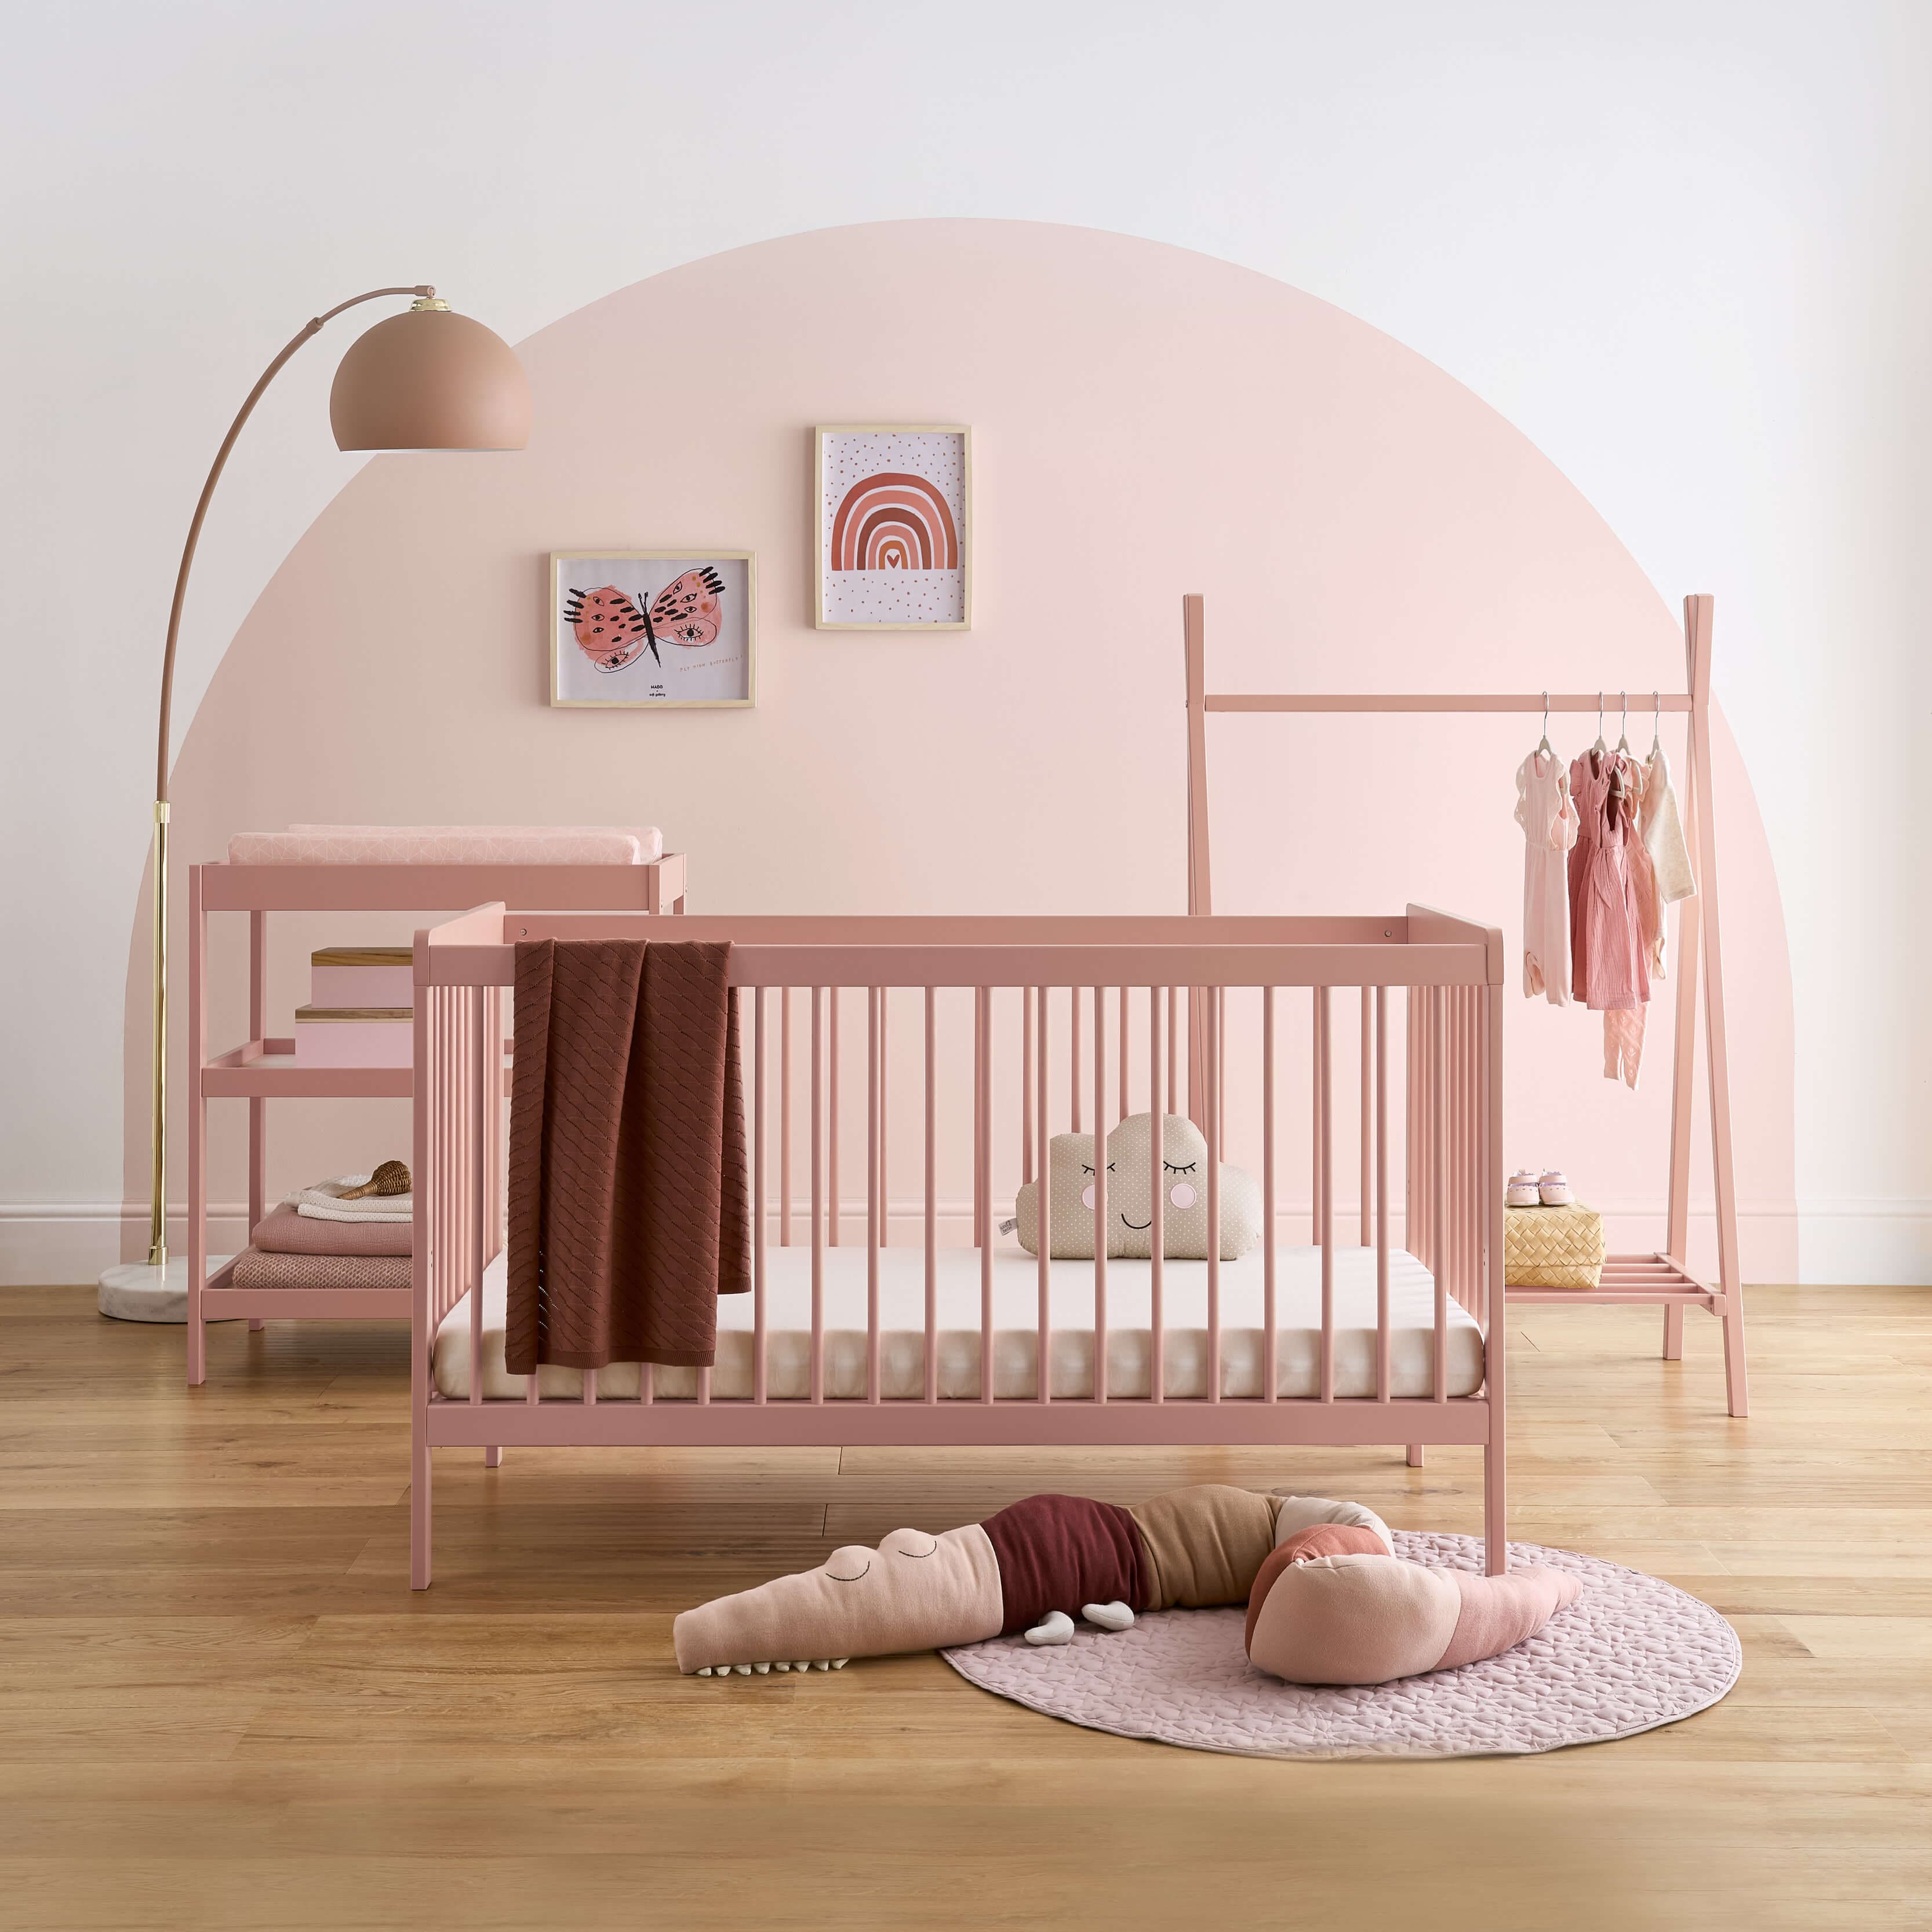 Cuddleco Nola 3 Piece Nursery Furniture Set - Blush Pink - For Your Little One